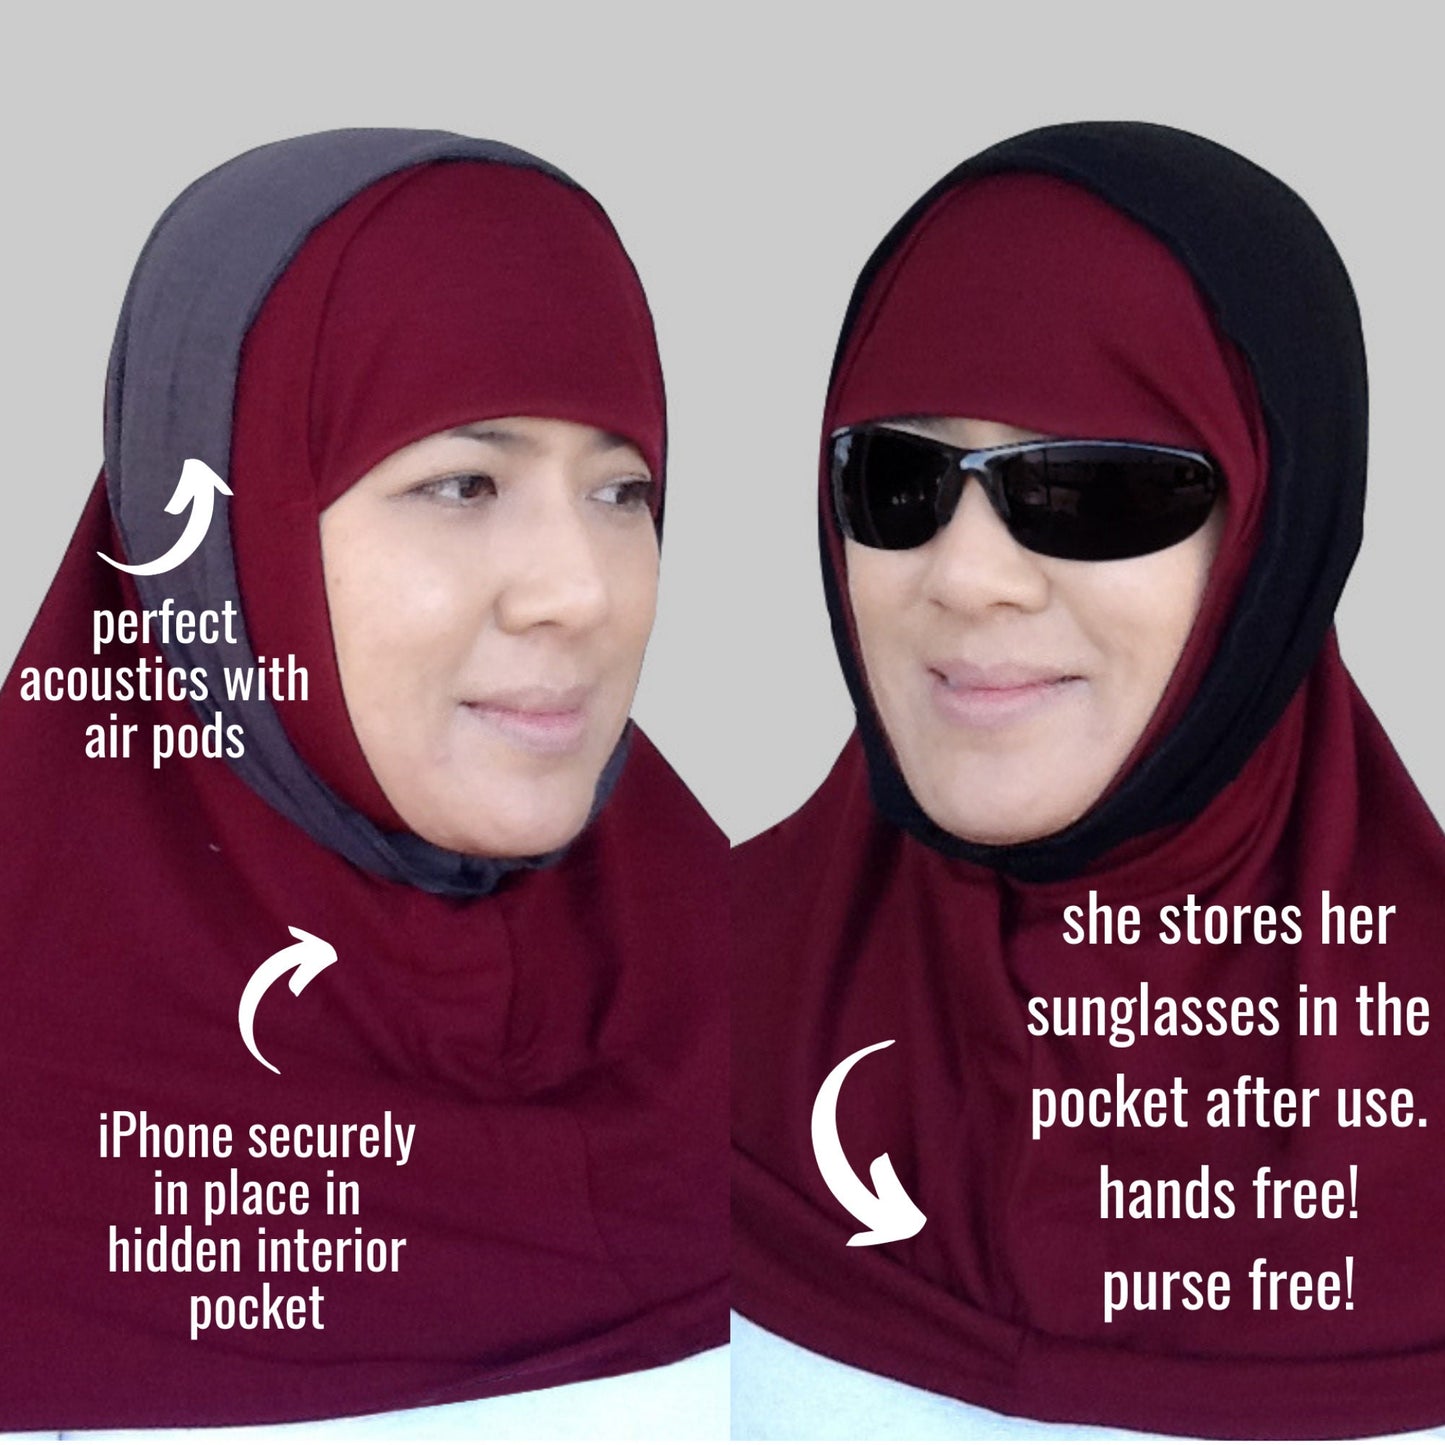 Hijab for Doctors, Hijab for Dentists, Hijab for Bluetooth, Hijab for Face Masks, Hijab for Airpods, Hearing Aid Hijab, Hijab for Glasses